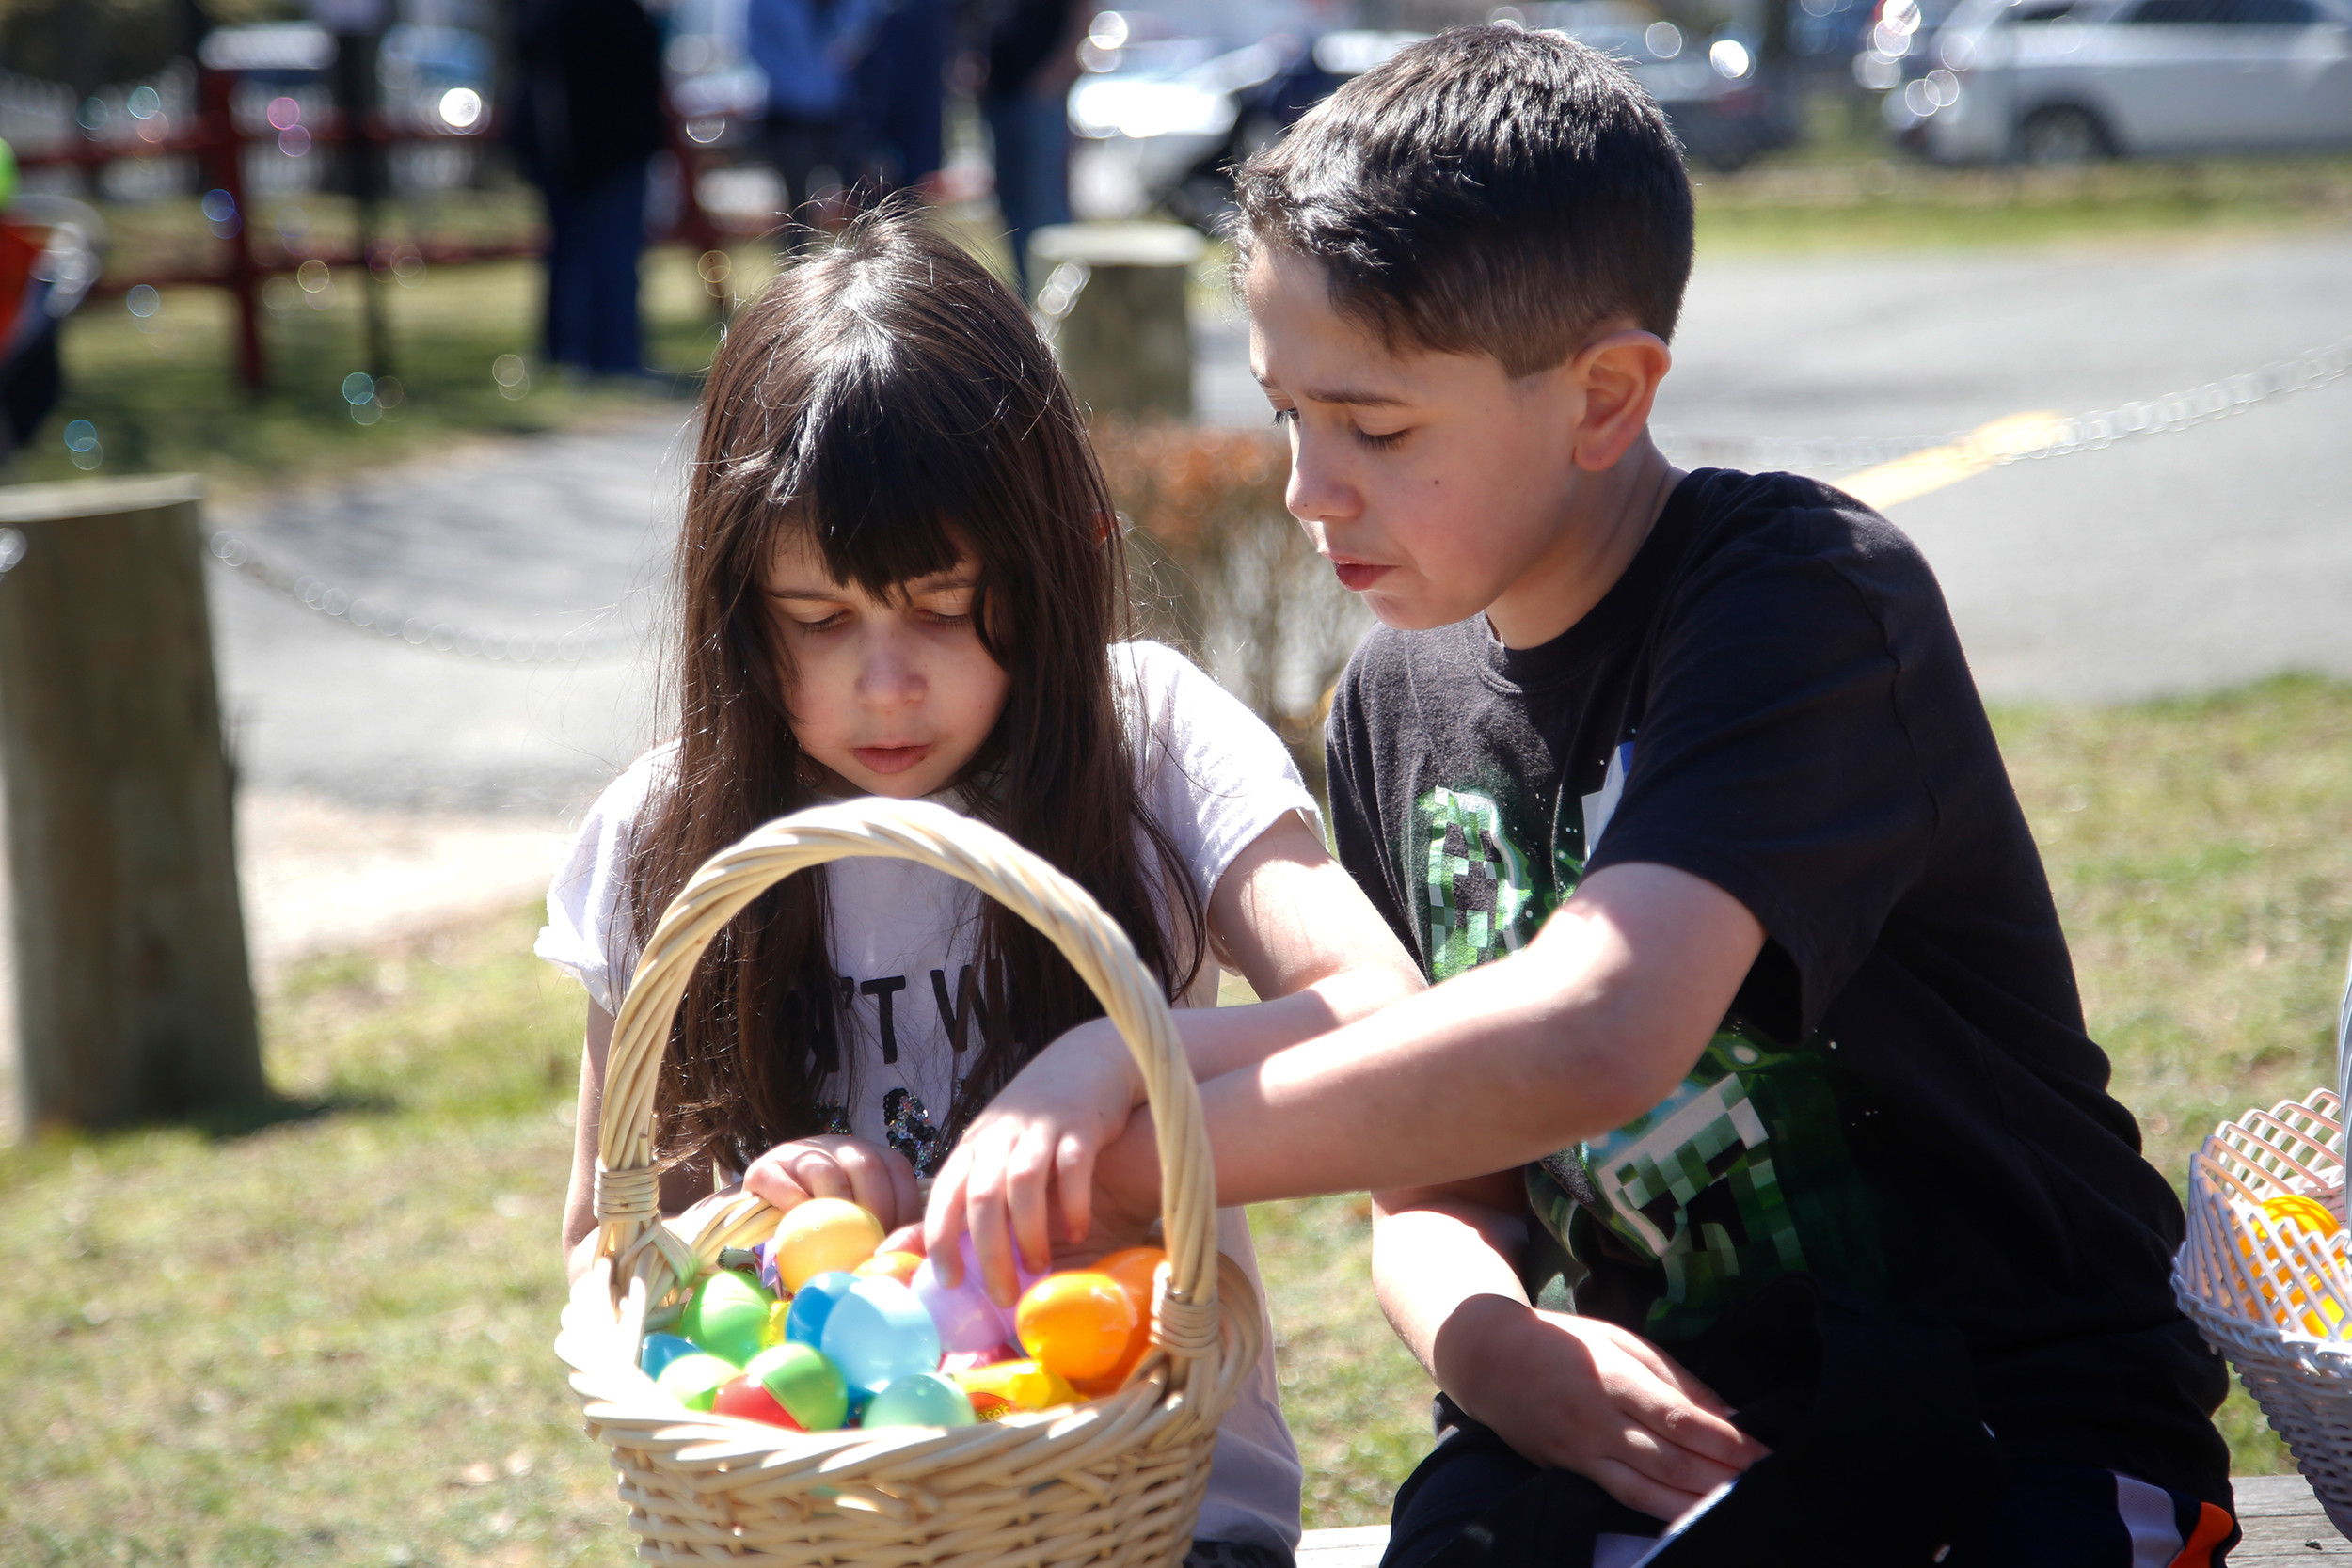 Julianna and Salvatore Cassese sorted through their egg collection.